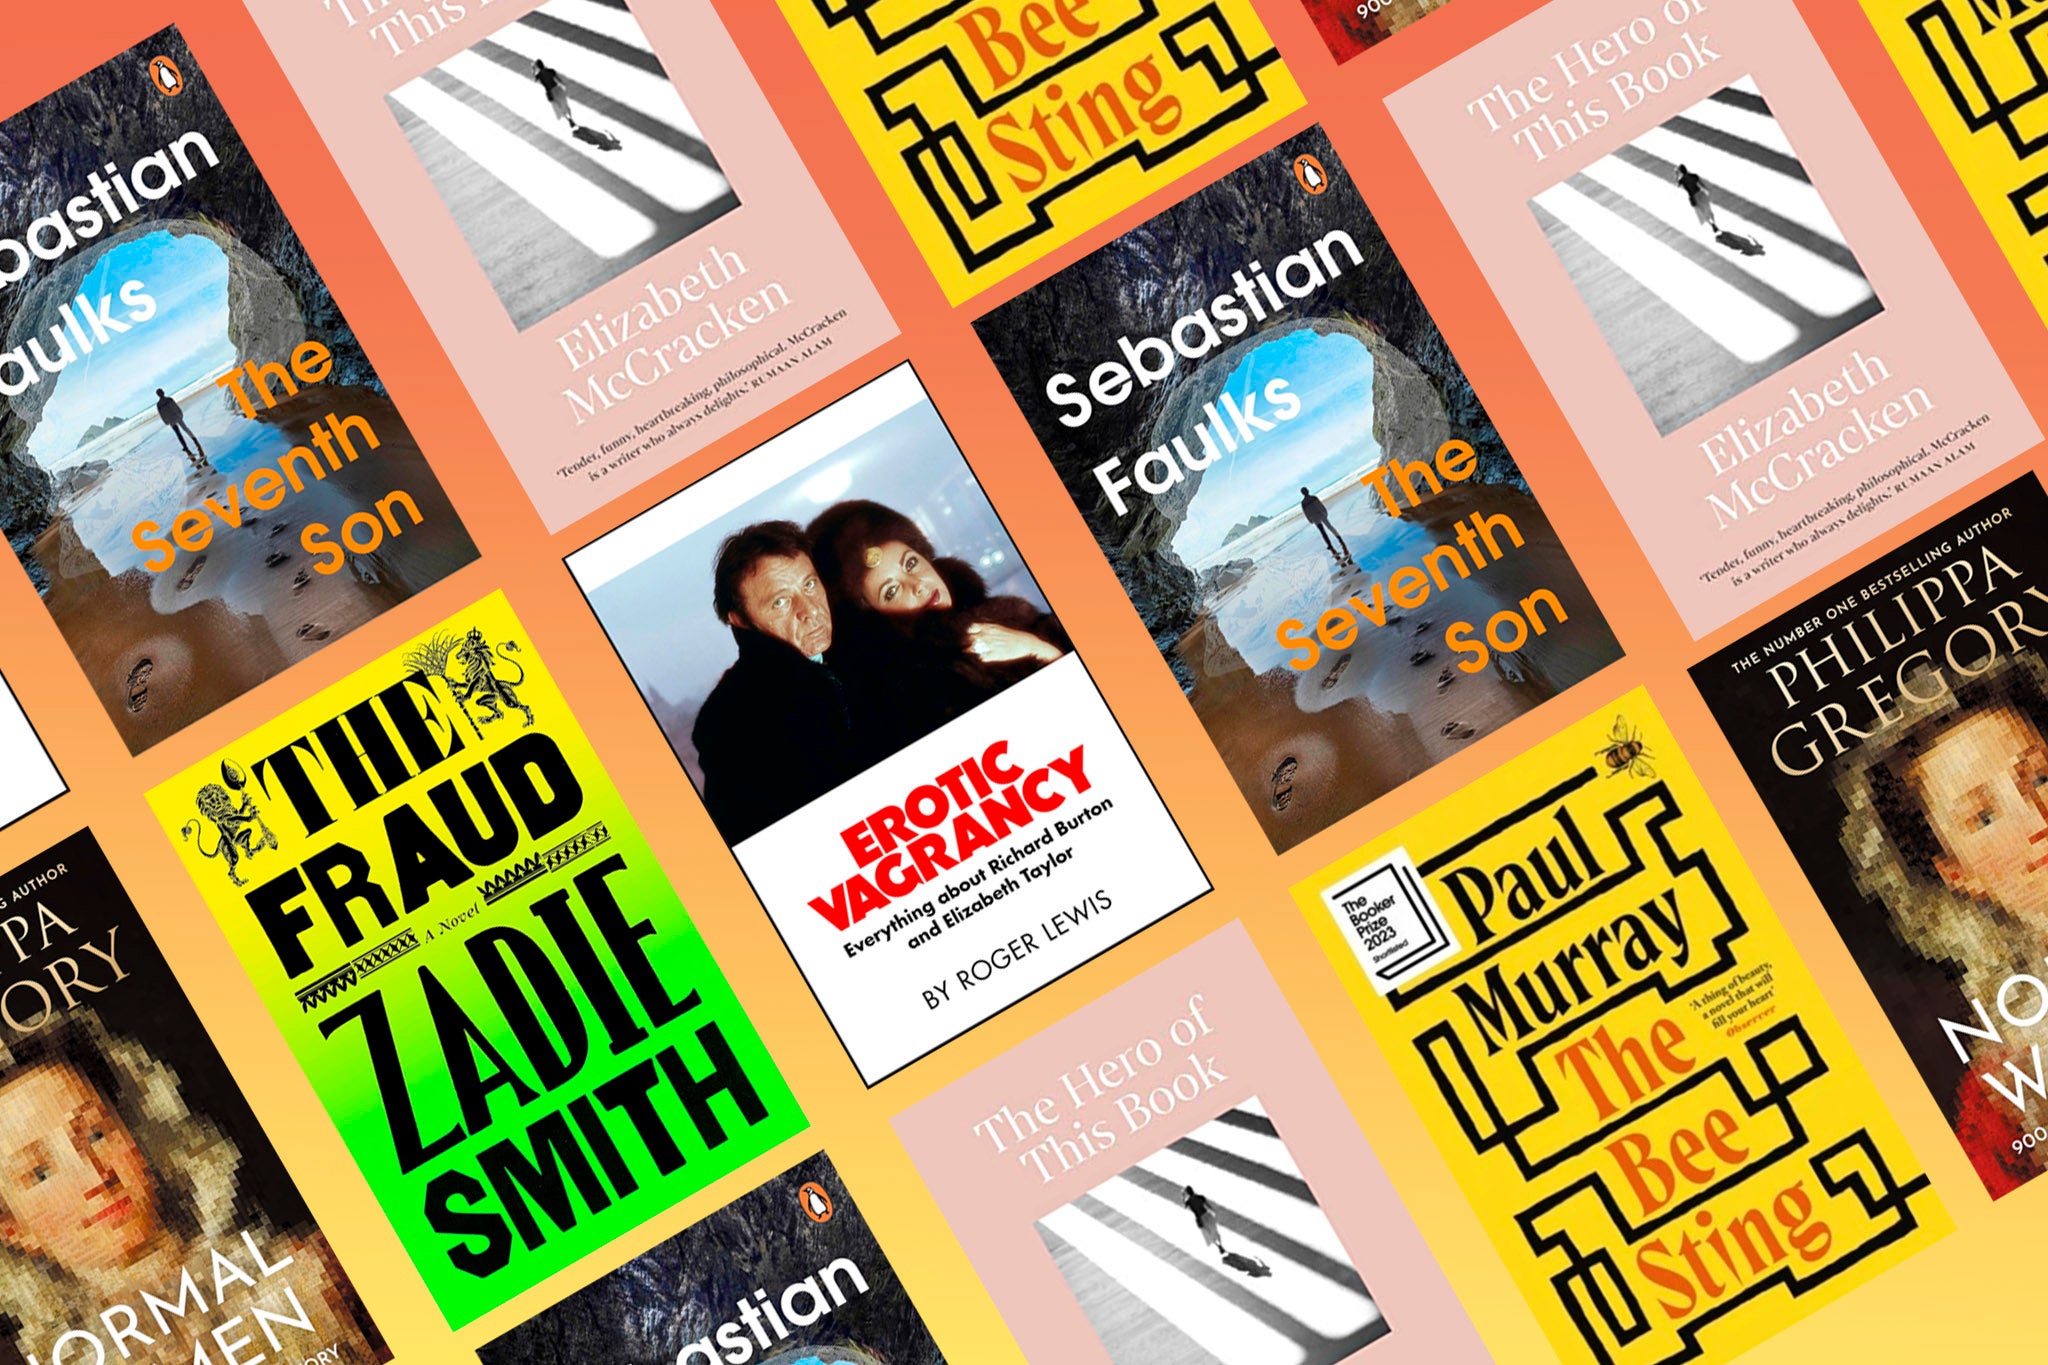 The 25 best books of the year, from Zadie Smith to Paul Murray